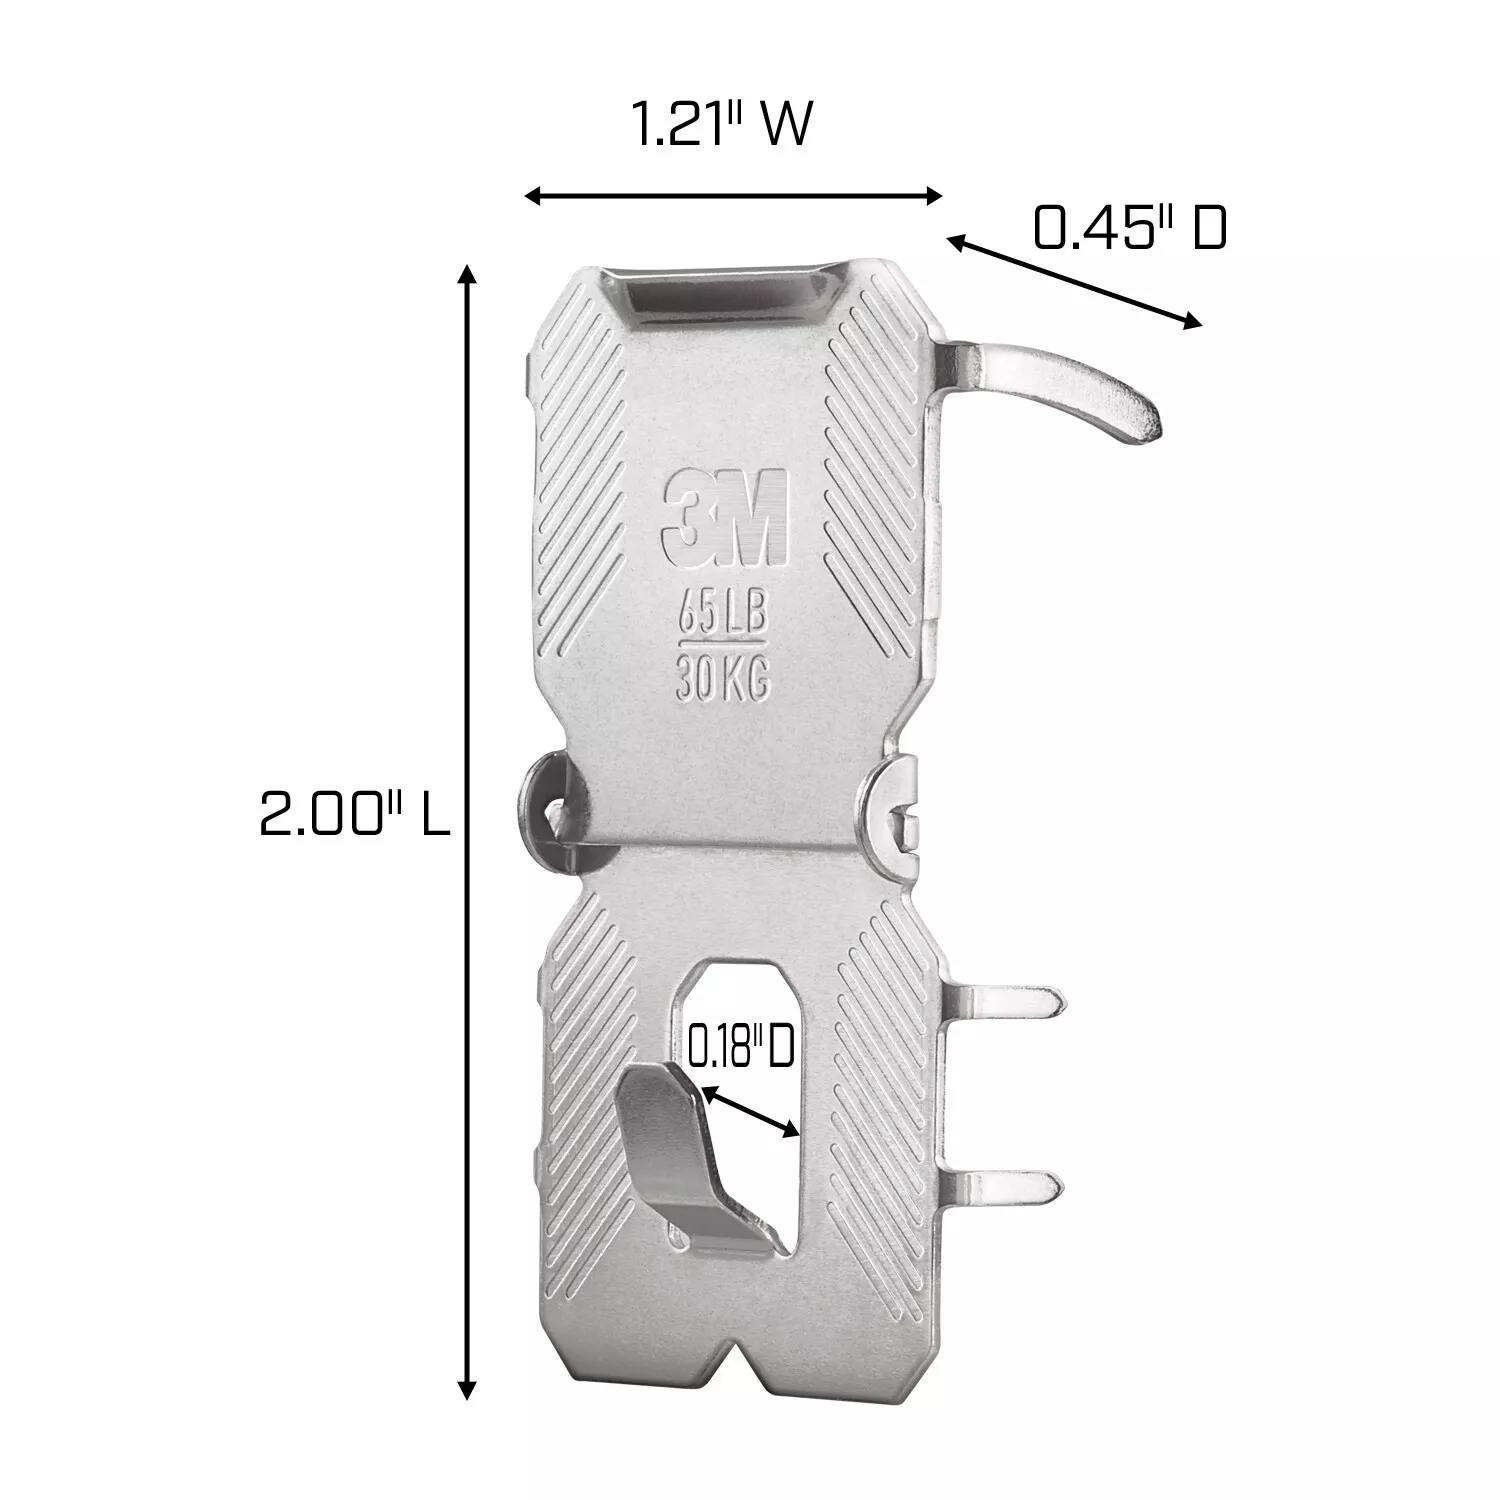 Product Number 3PH65M-1EF | 3M CLAW™ 65lb Drywall Picture Hanger with Spot Marker 3PH65M-1EF